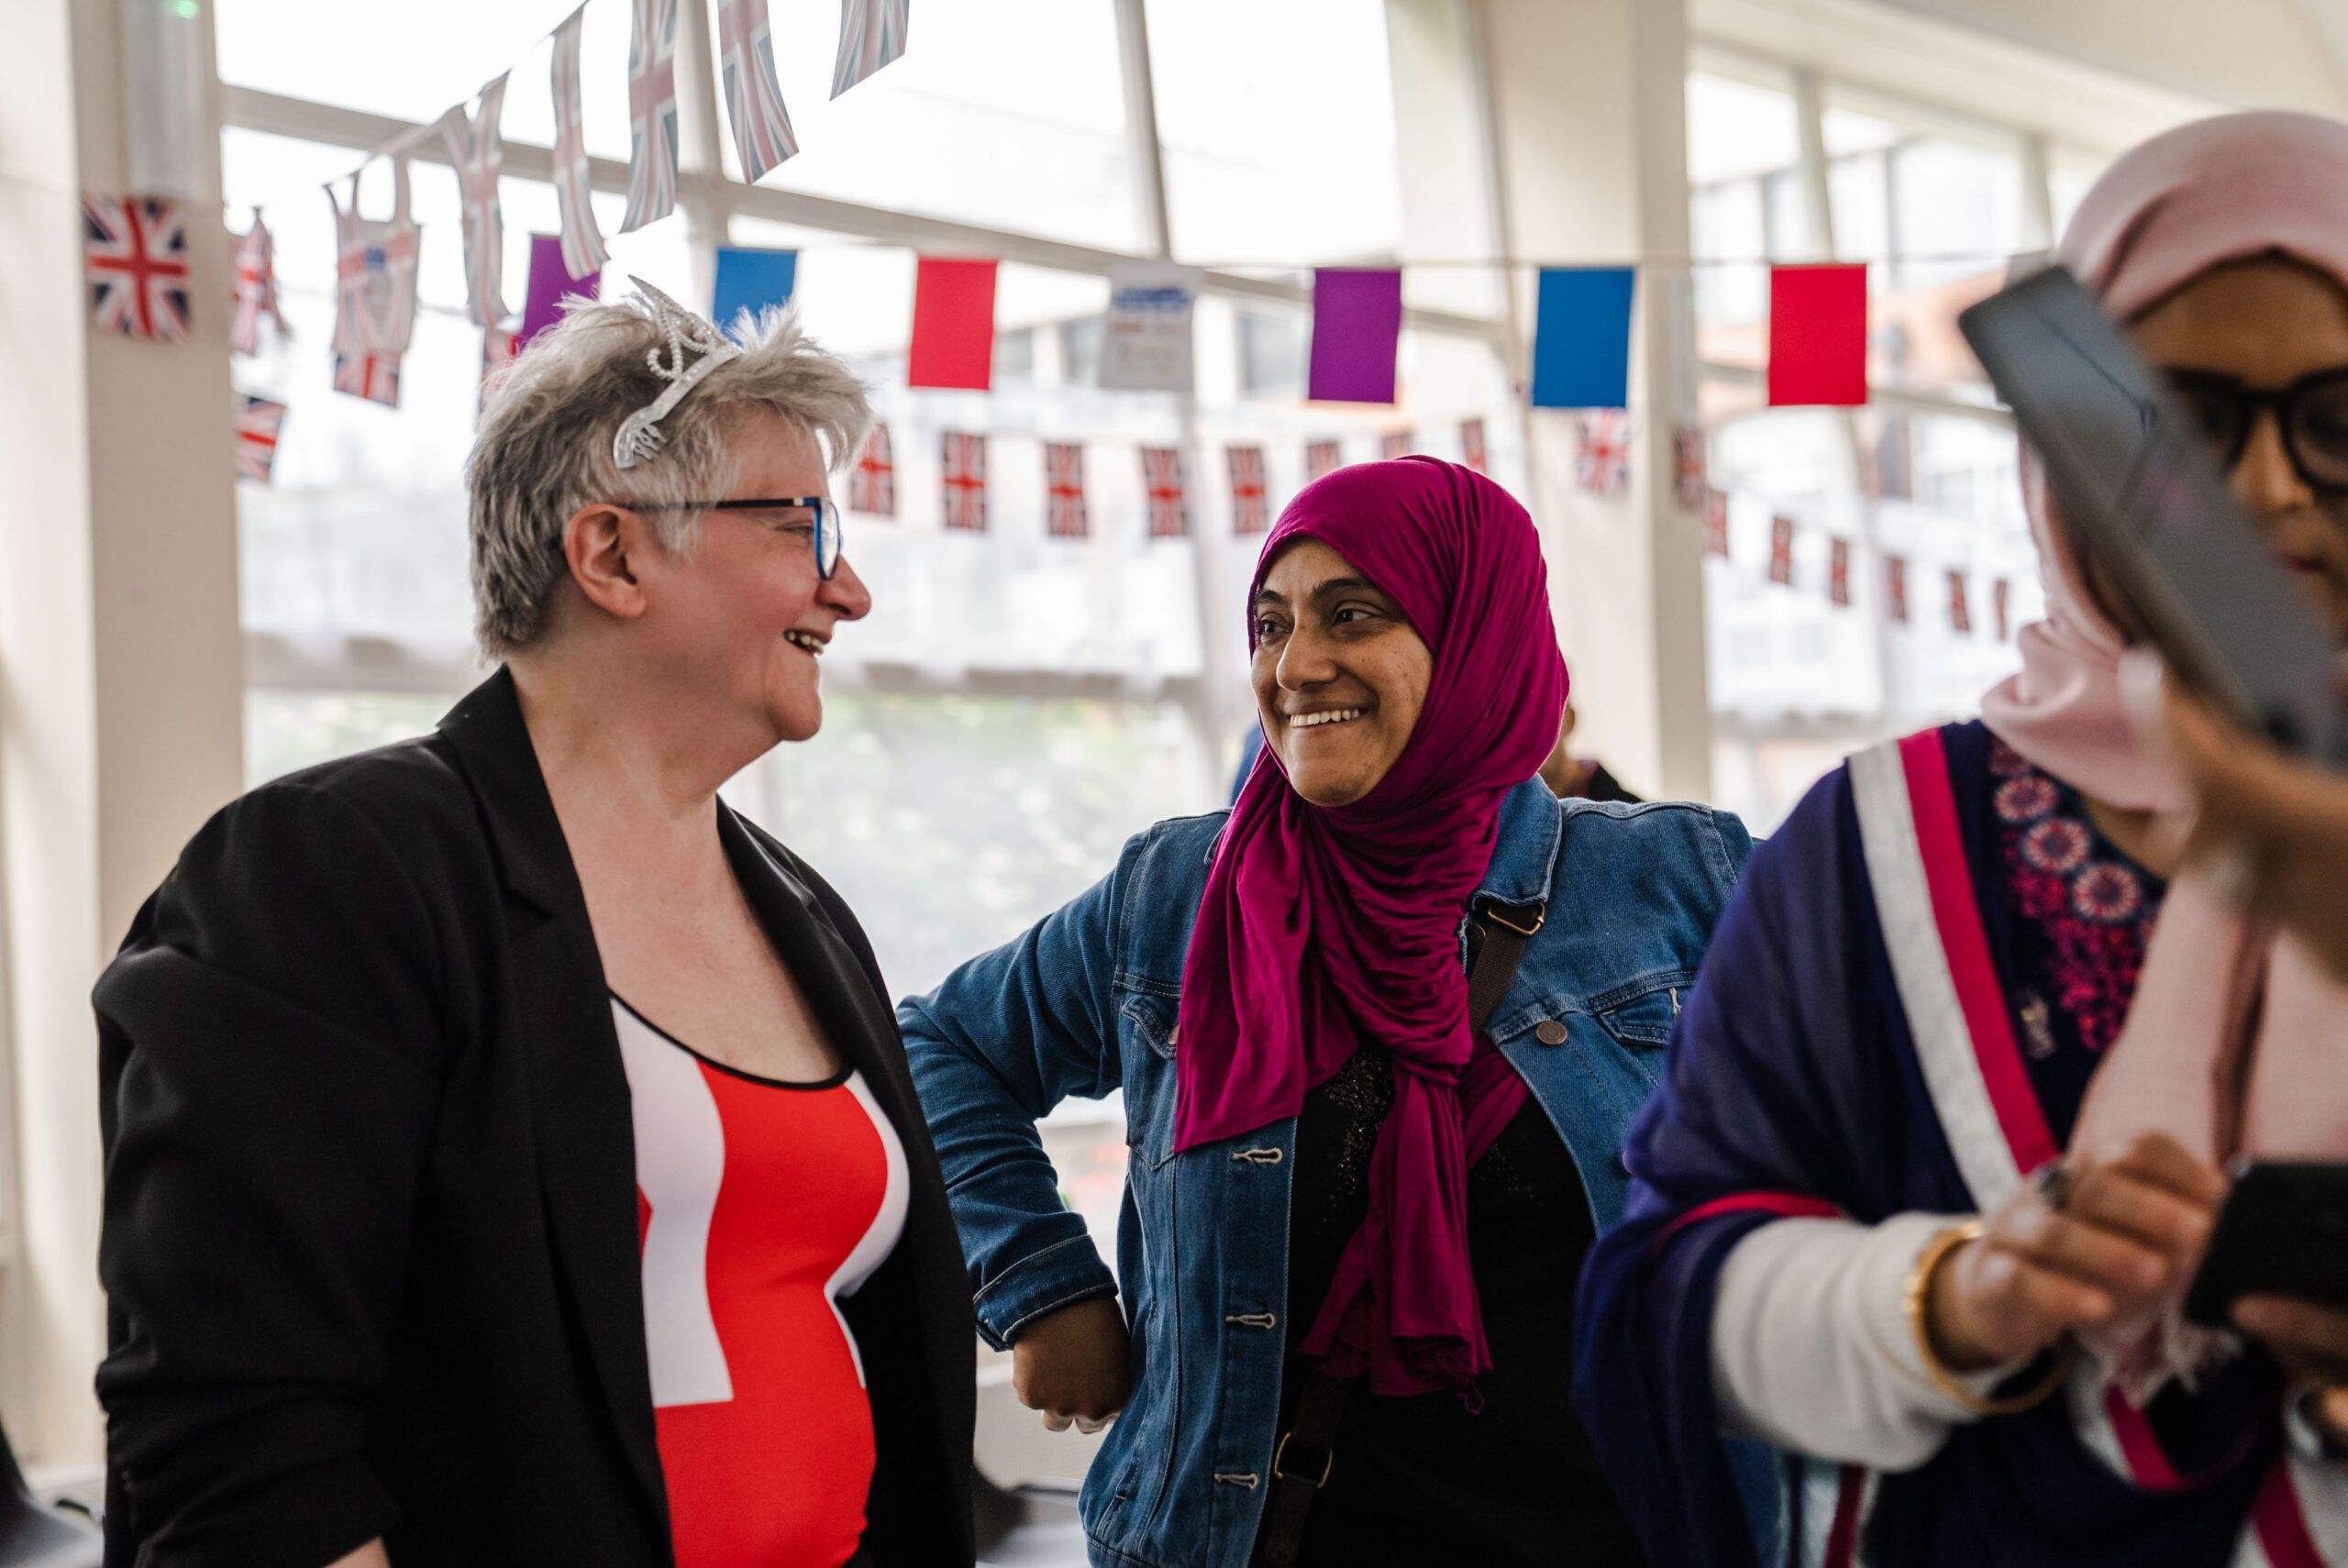 Two ladies smiling and enjoying a conversation at an indoor event with bunting.